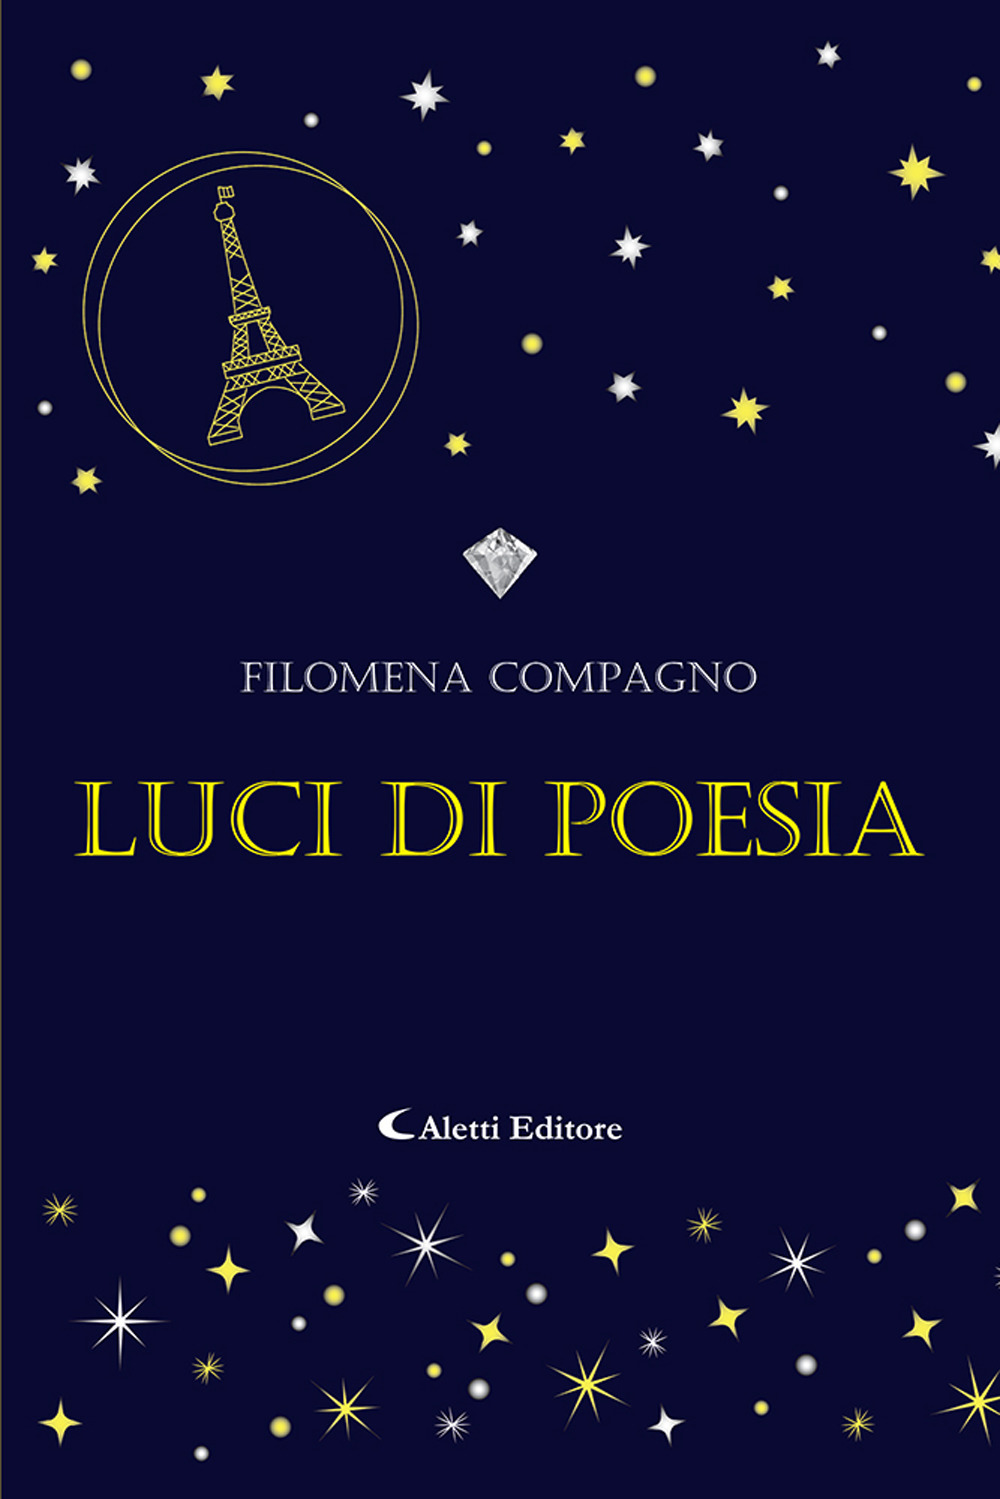 Image of Luci di poesia